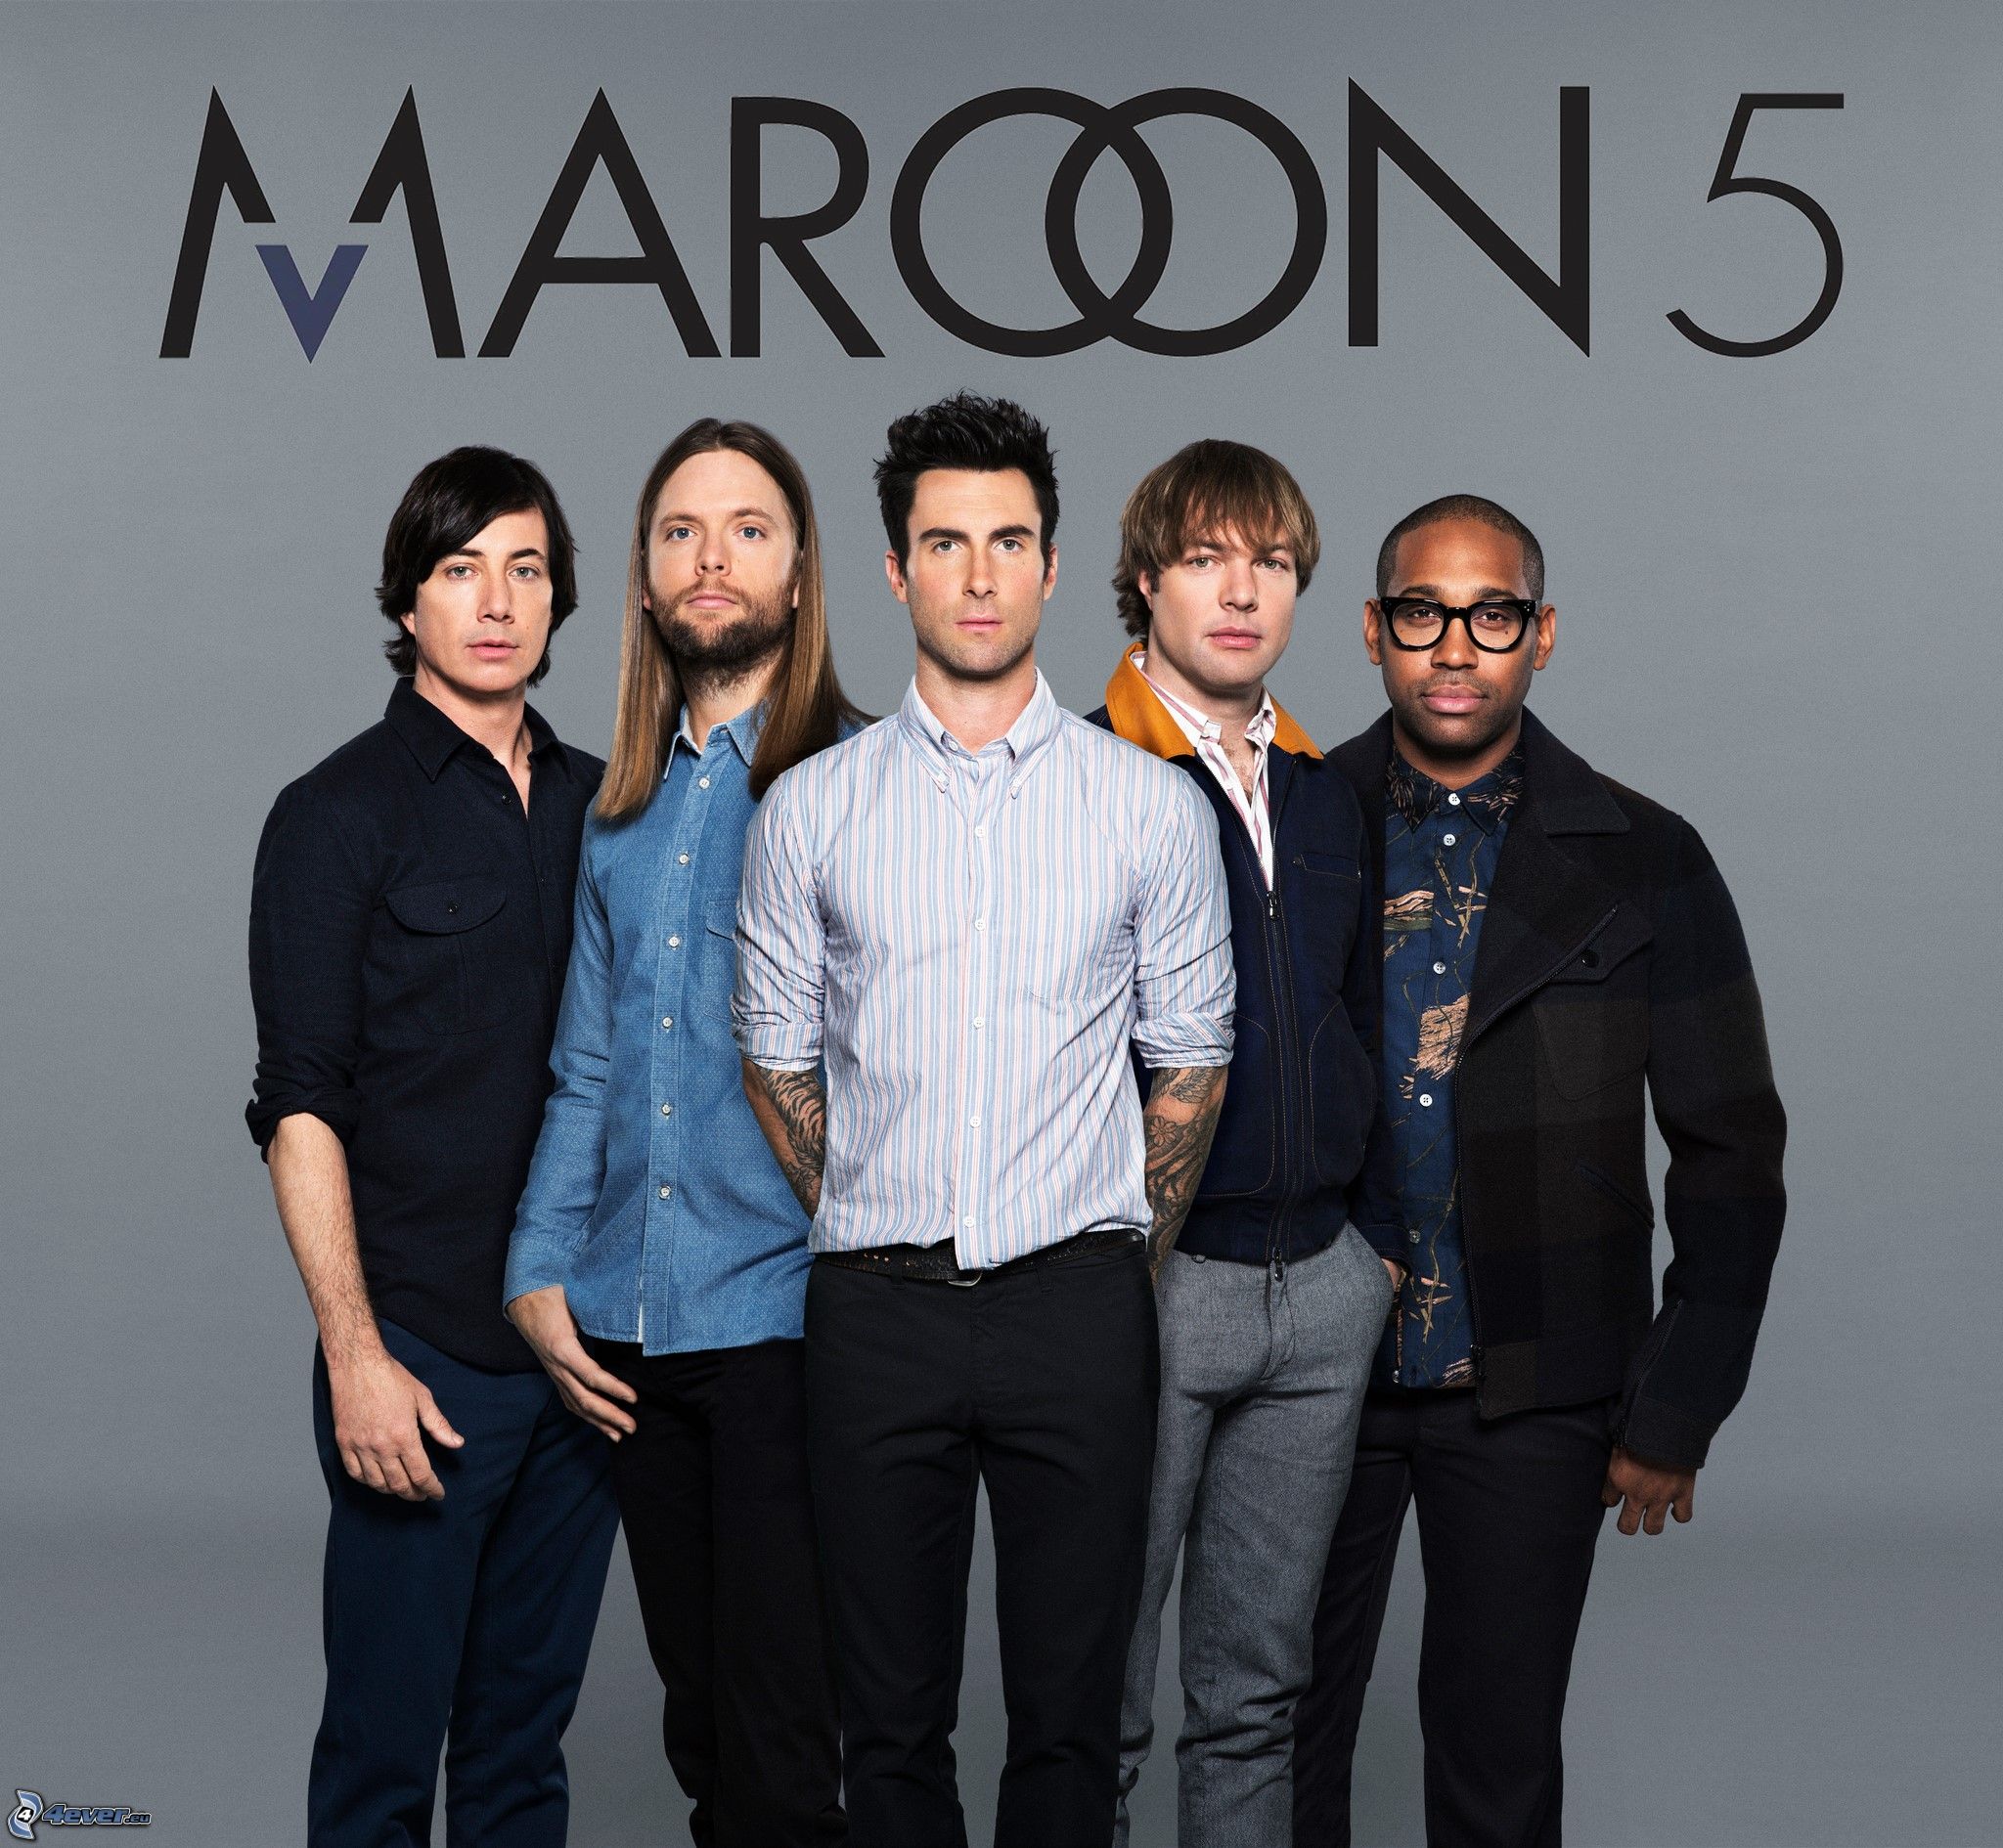 Photos from Fun Facts About Maroon 5